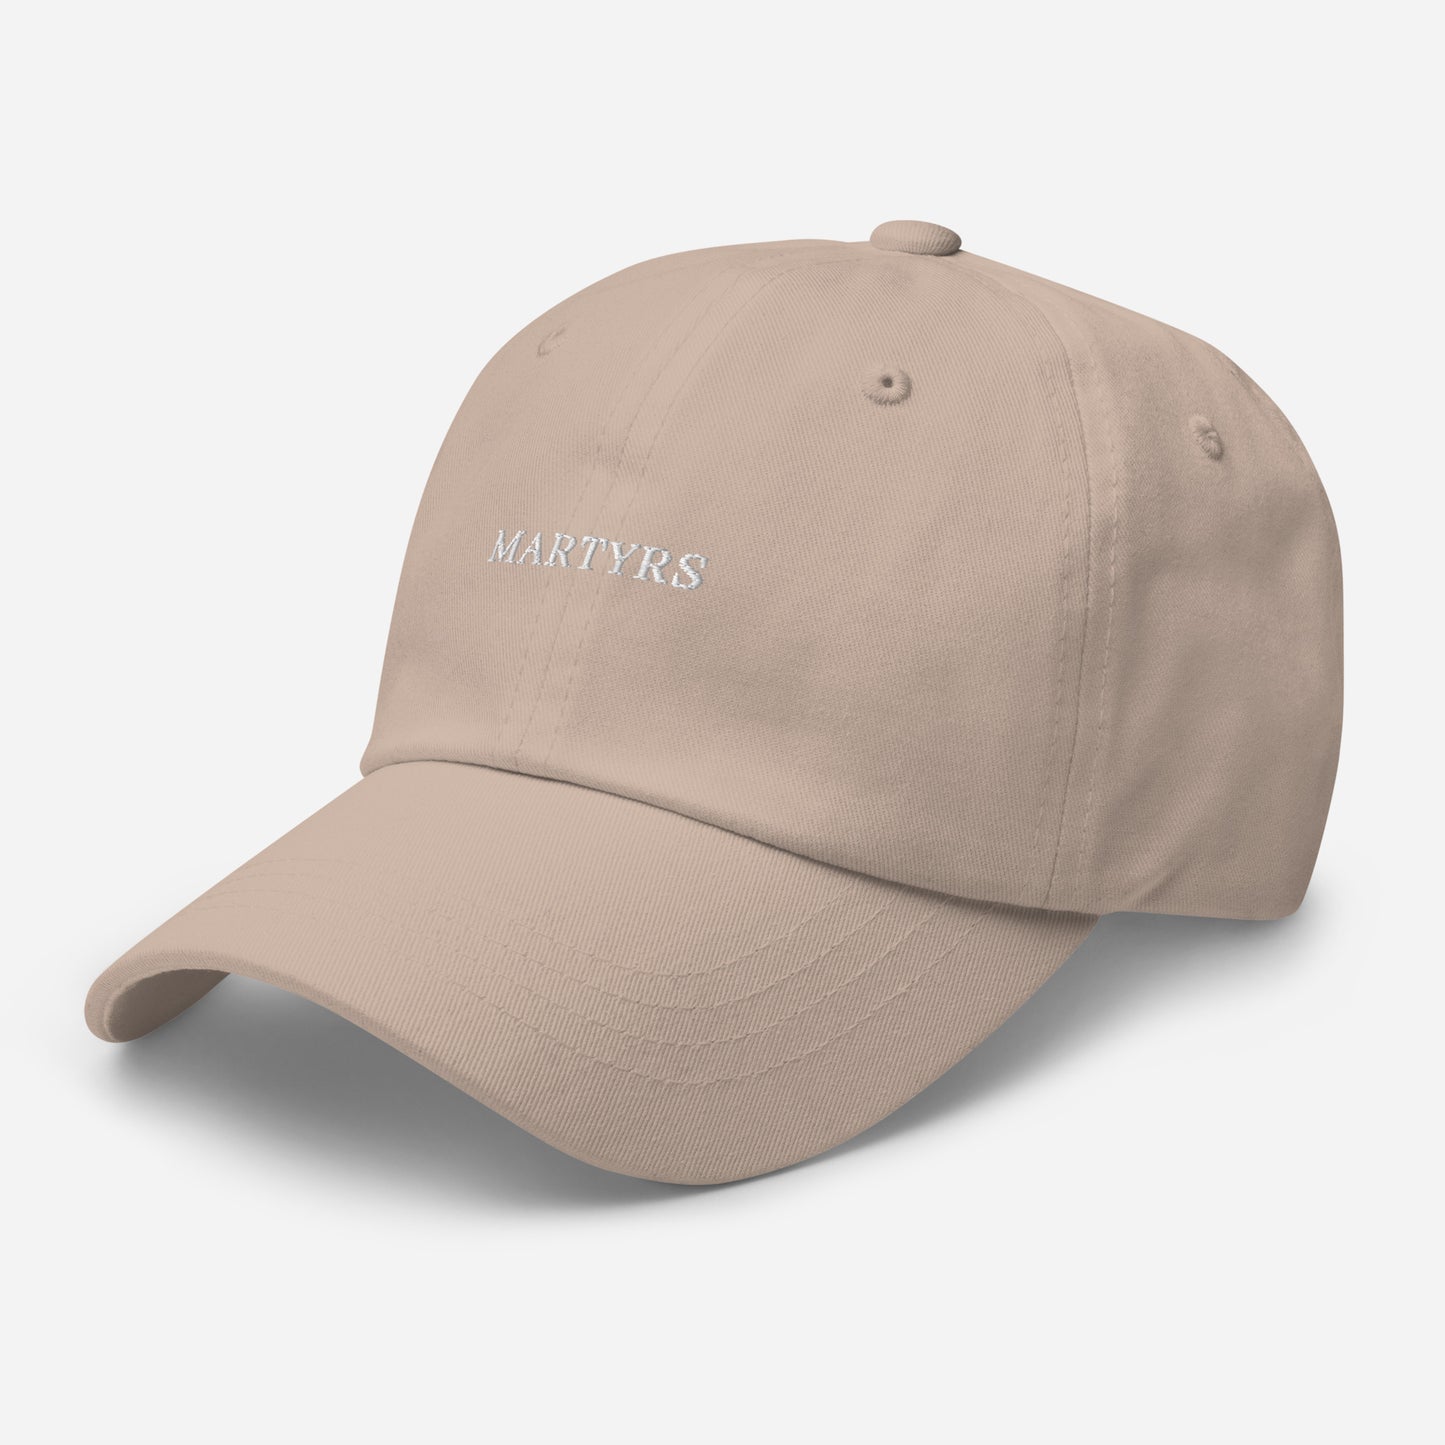 Martyrs - STONE Classic Dad hat - WHITE FONT embroidery